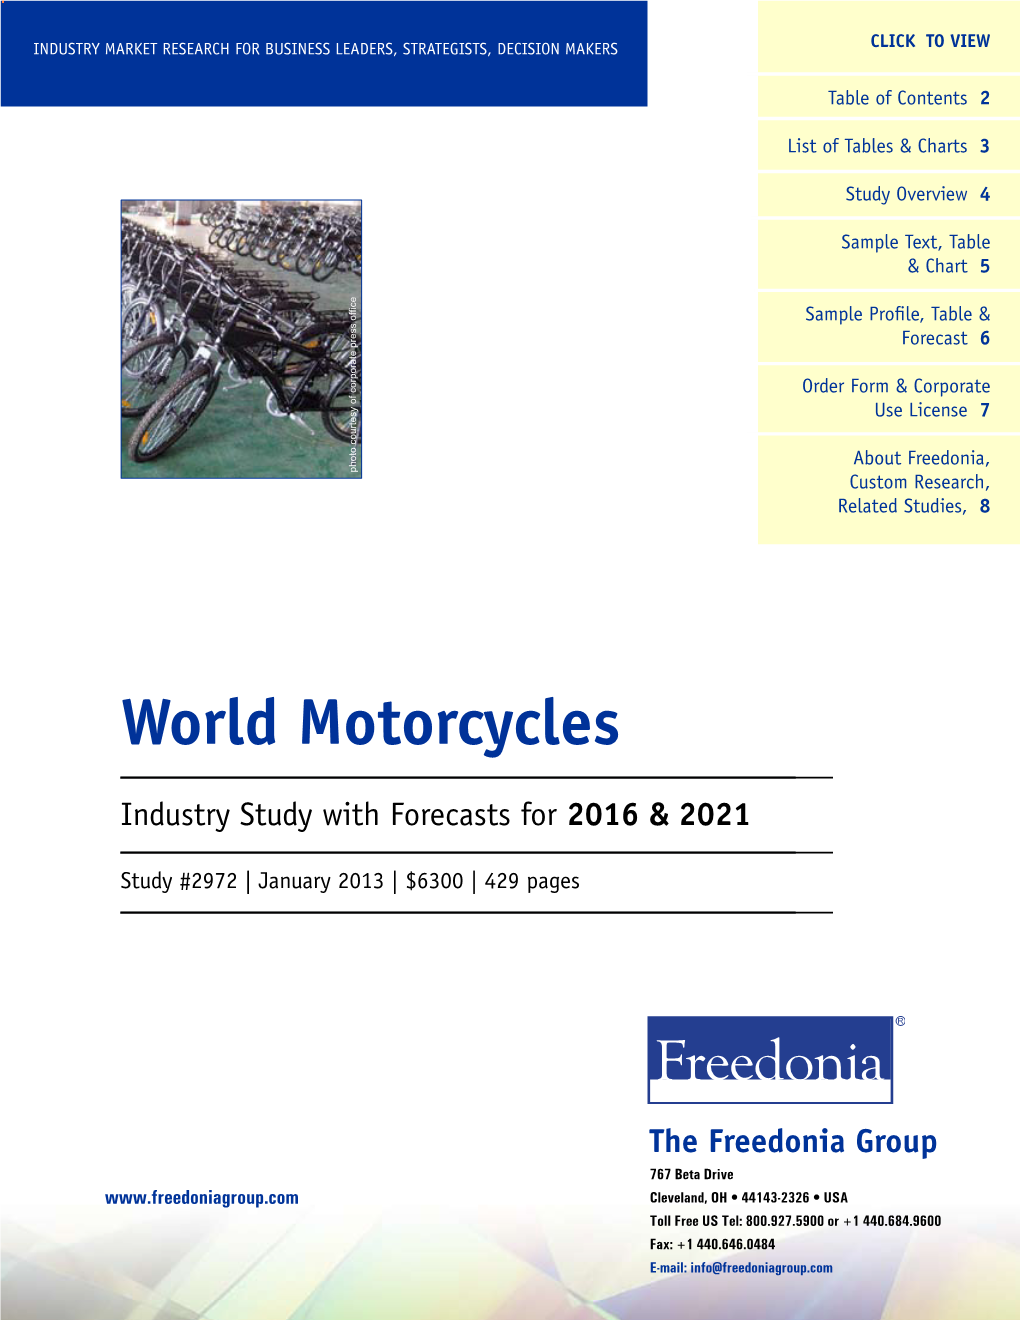 World Motorcycles